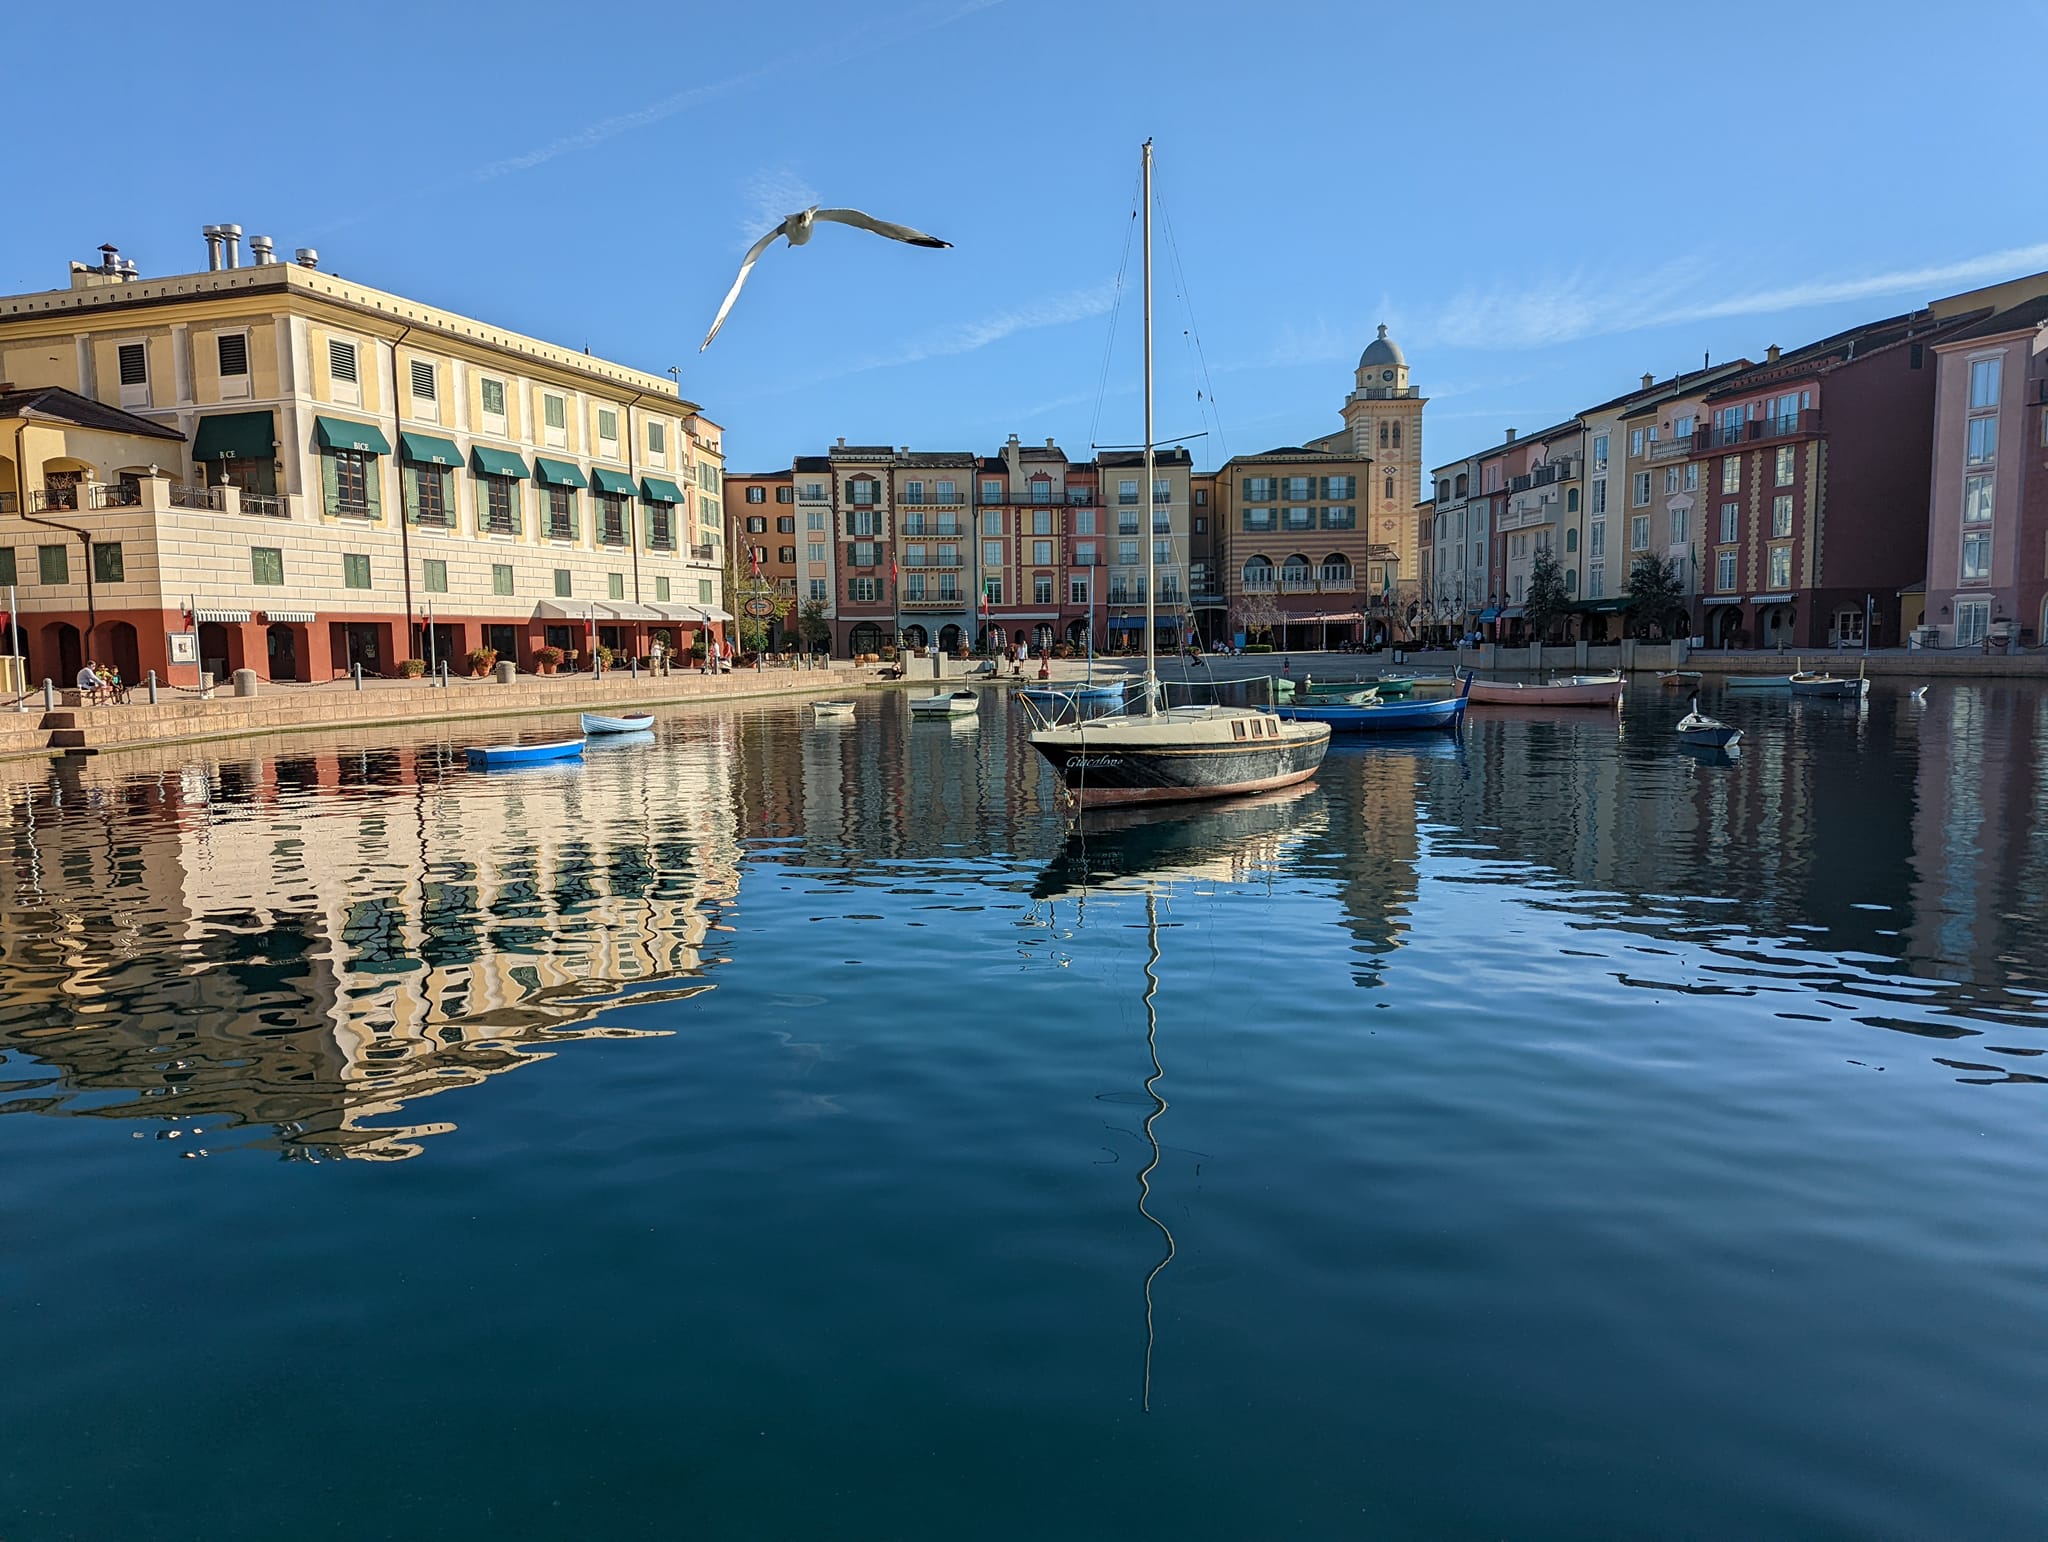 This is like a scene from Italy at Portofino Bay.